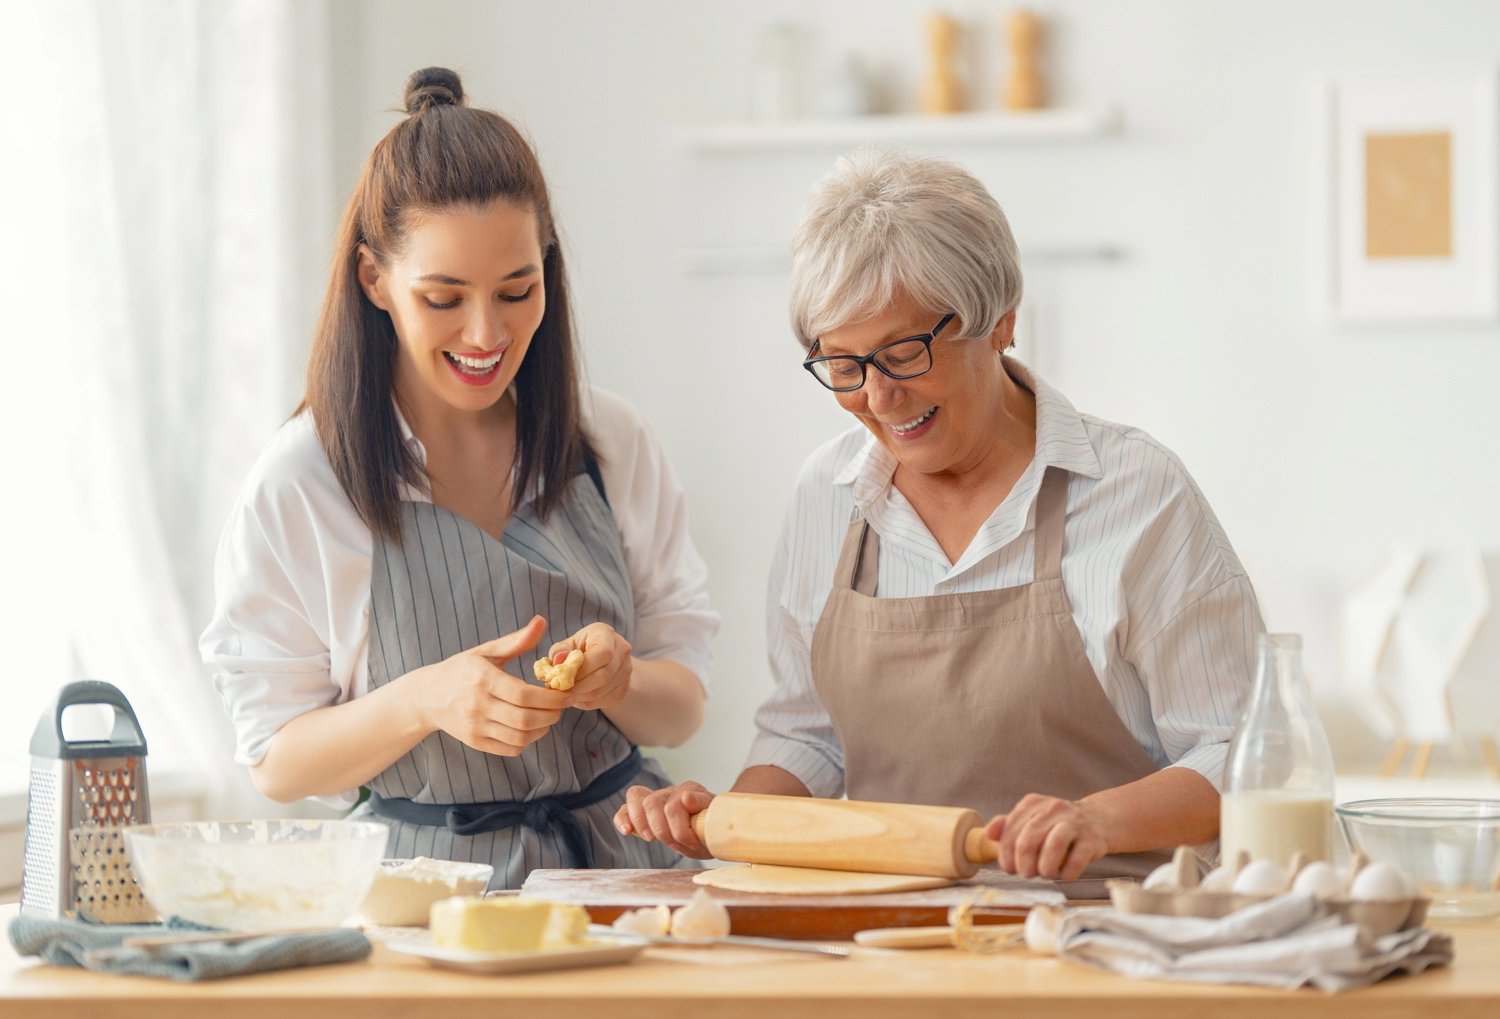 A senior woman and younger woman baking together